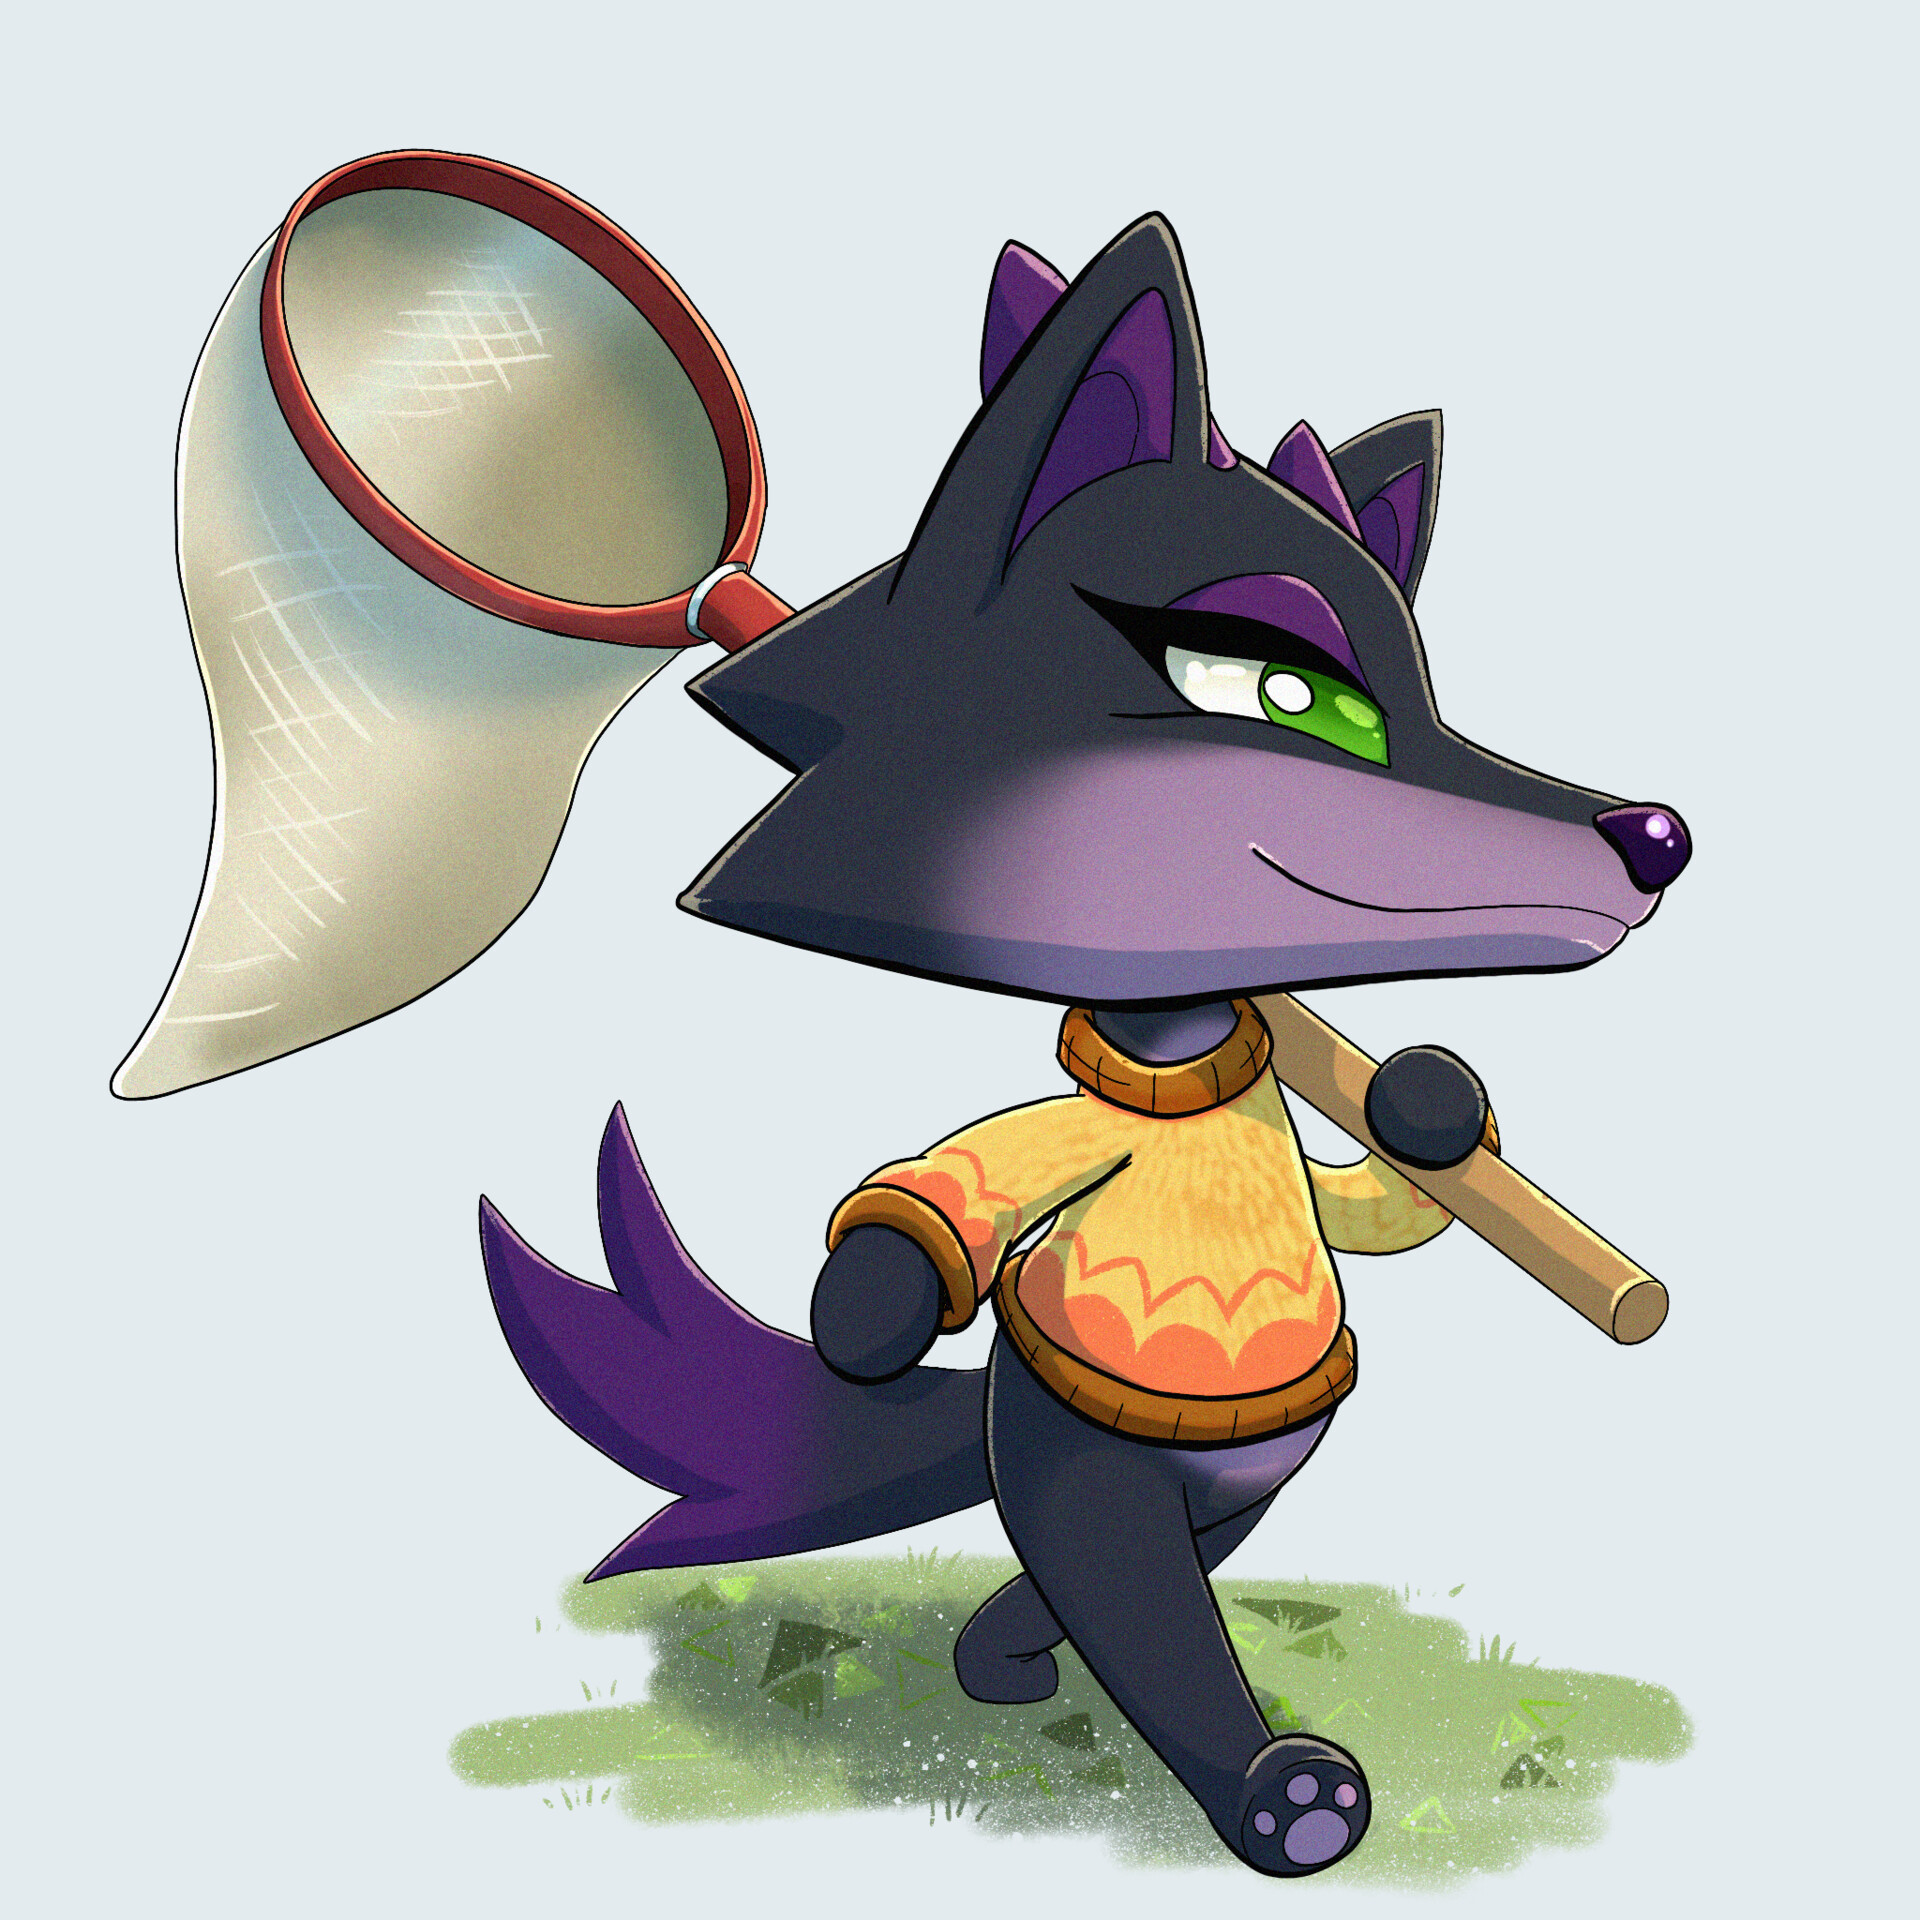 ArtStation - I Animal Crossing'd my friends and I